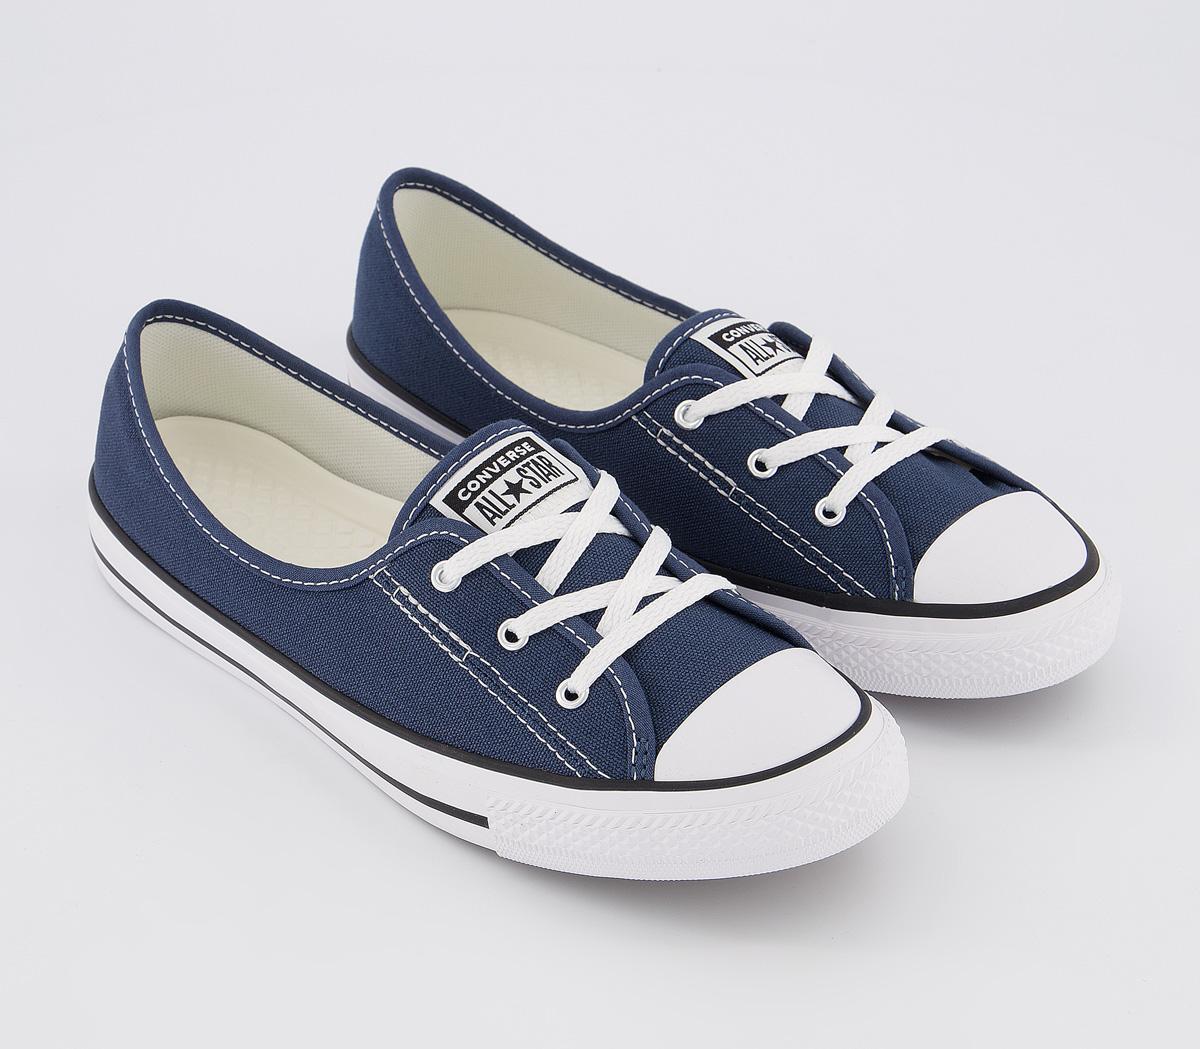 Converse Ctas Ballet Lace Trainers Navy White Black - Hers trainers